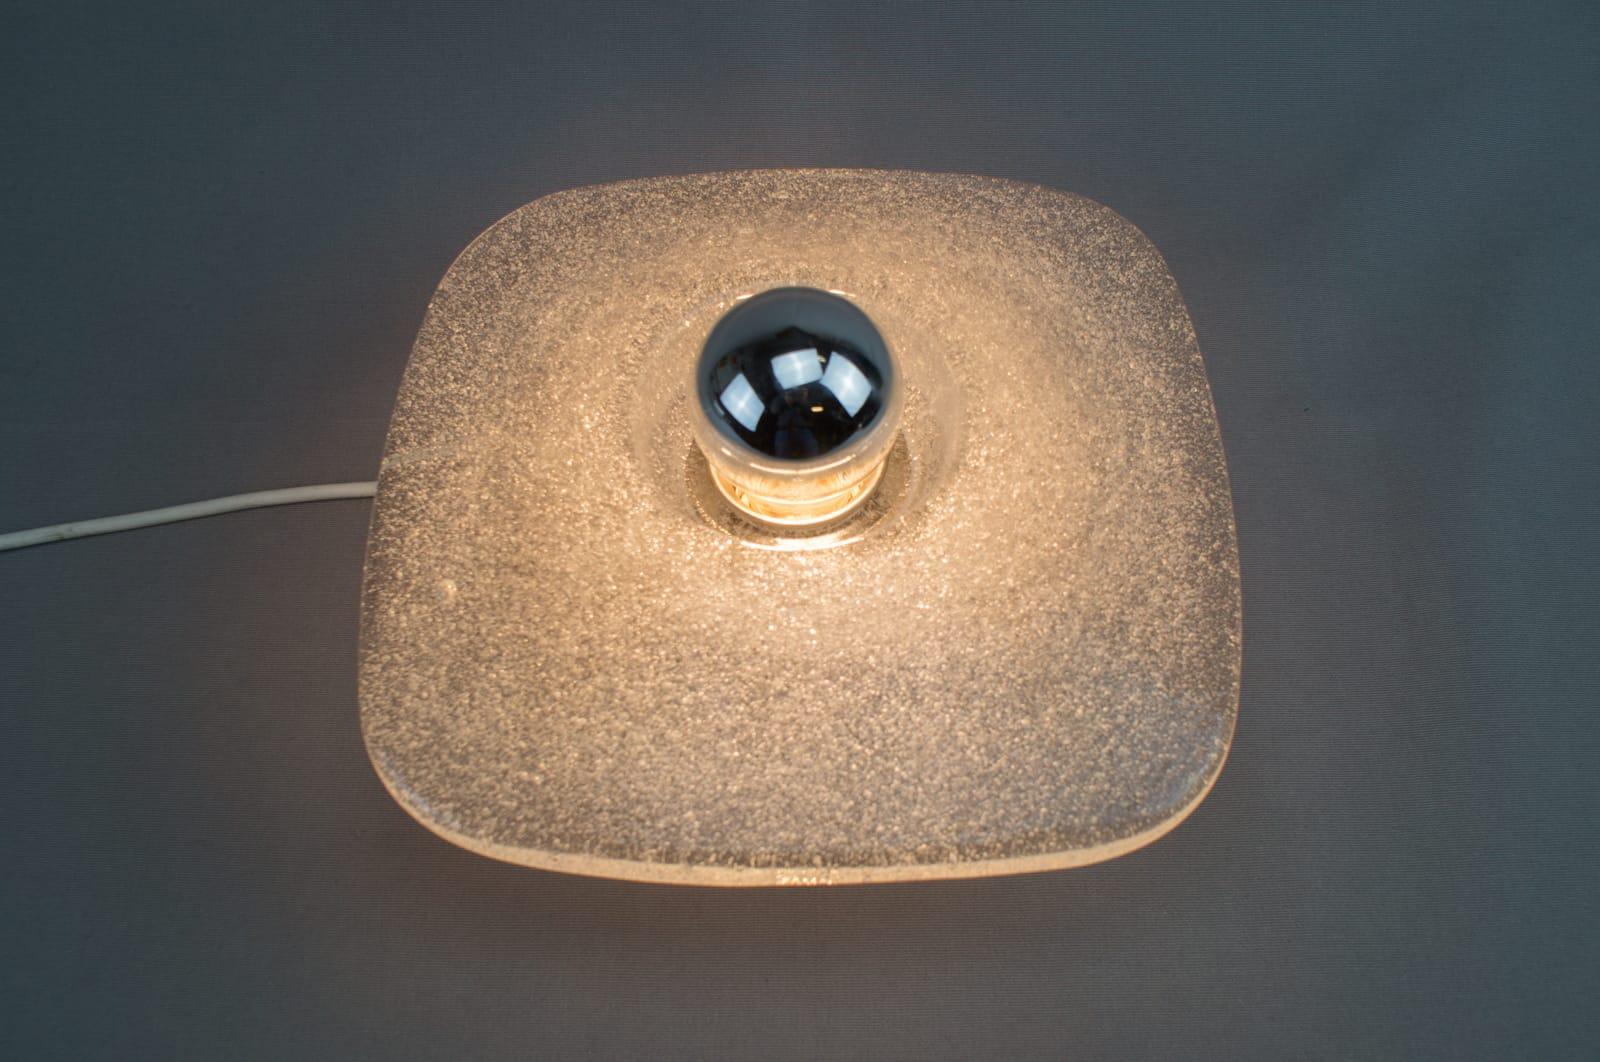 Heavy Ice Glass Wall or Ceiling Light by Peill & Putzler, Germany, 1960s (Moderne der Mitte des Jahrhunderts)